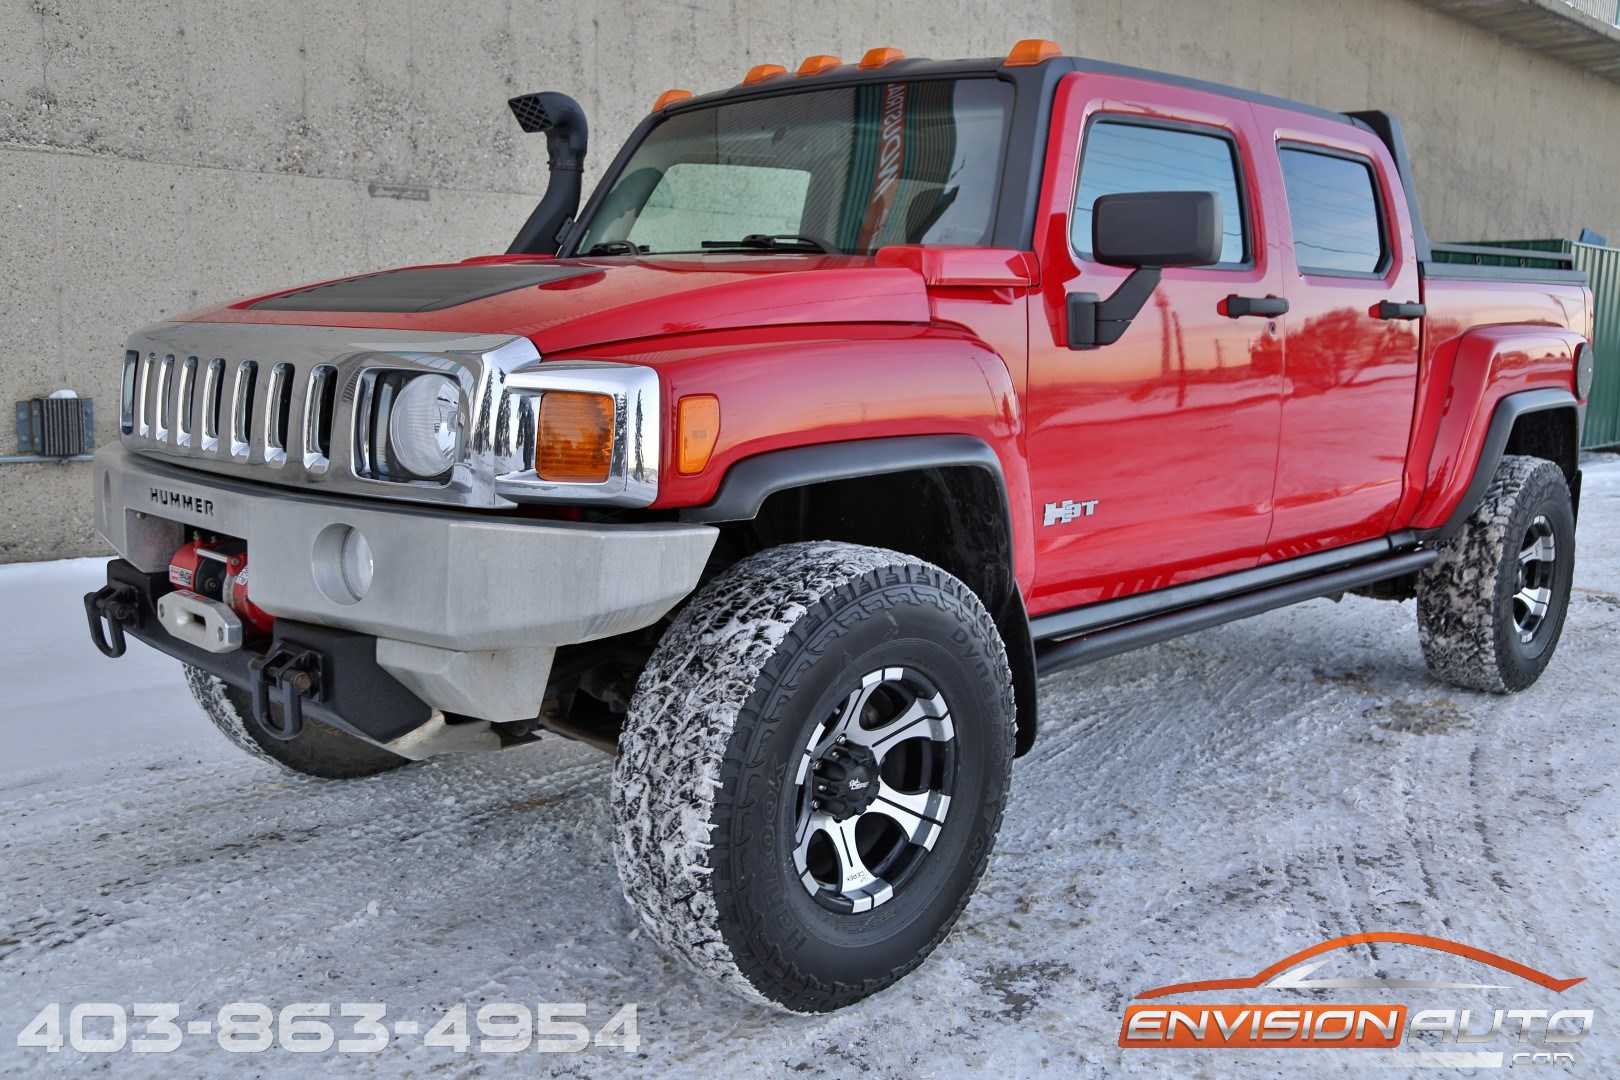 2010 H3T Hummer Truck Offroad Pkg 4×4 – Final Year Produced! - Envision Auto1620 x 1080